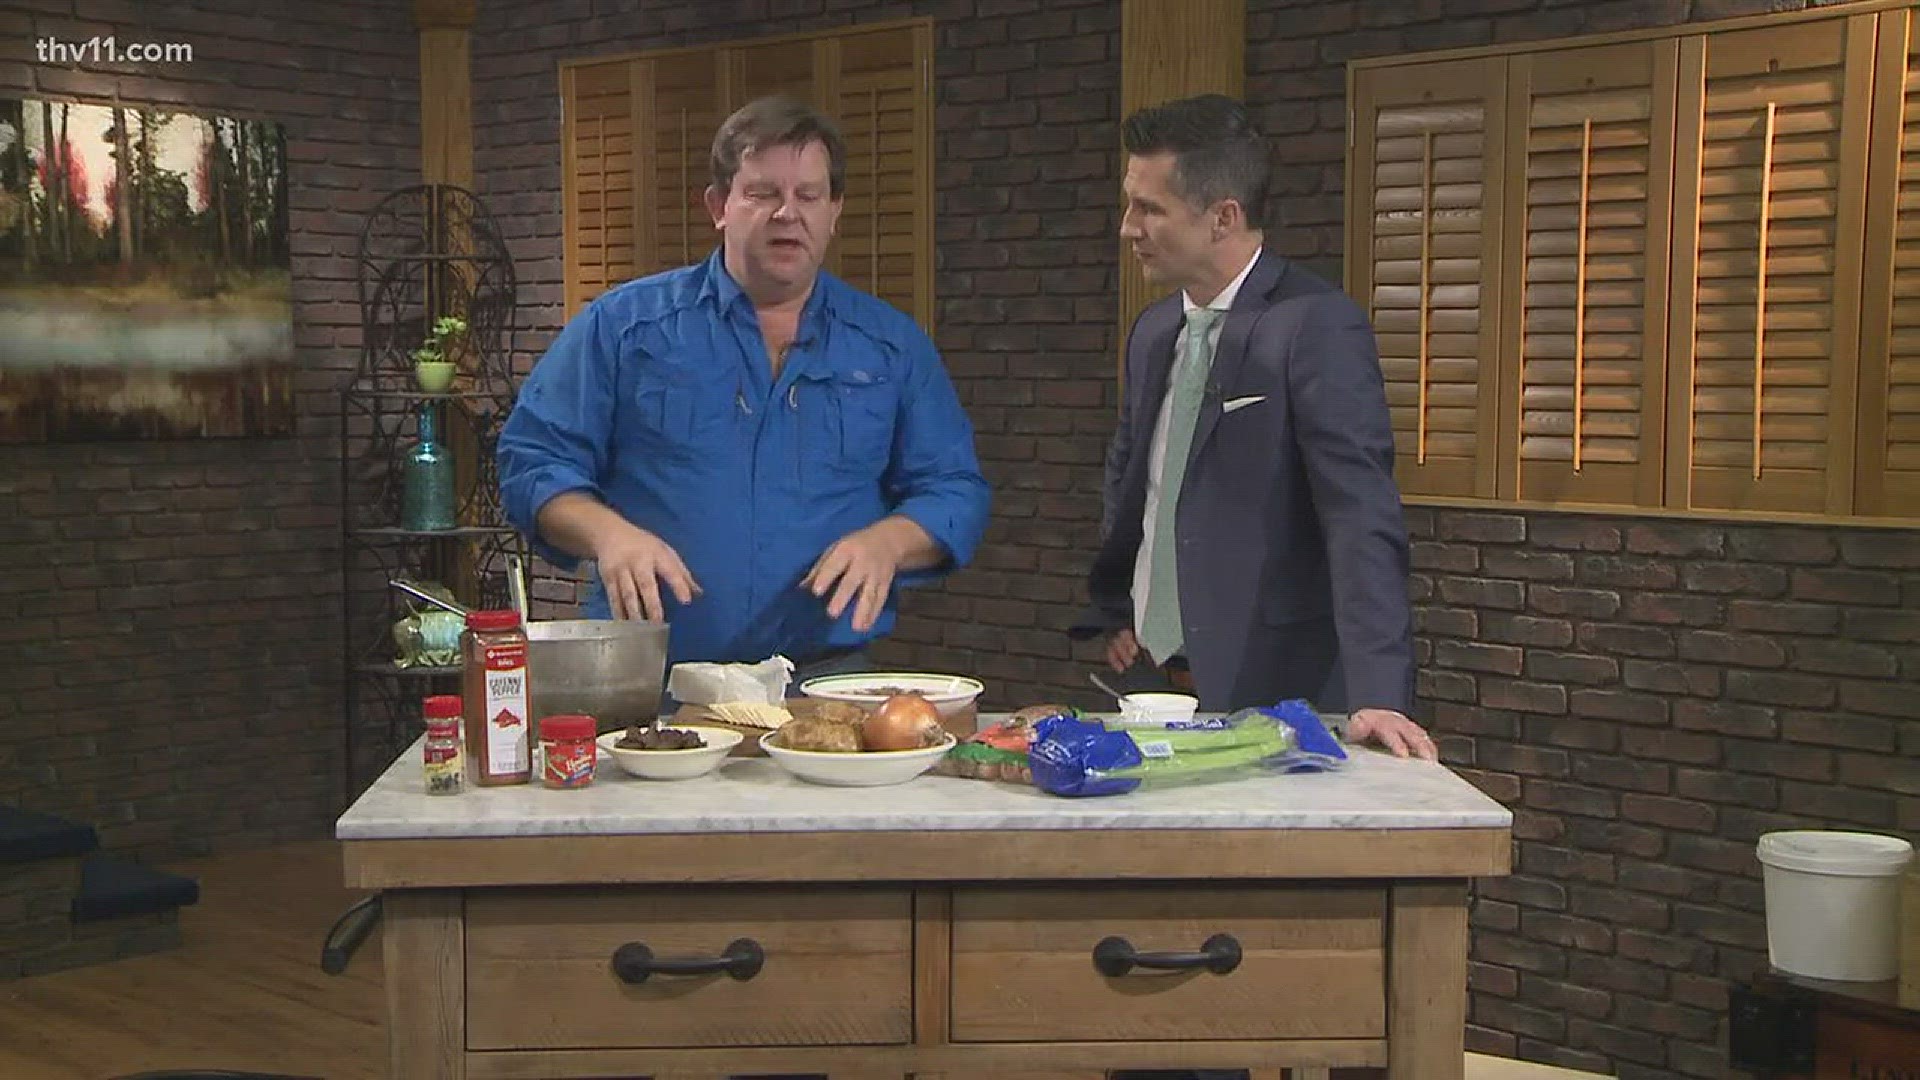 Anthony Michael from the Cross-Eyed Pig joined THV11 This Morning to show us how to make delicious beef stew